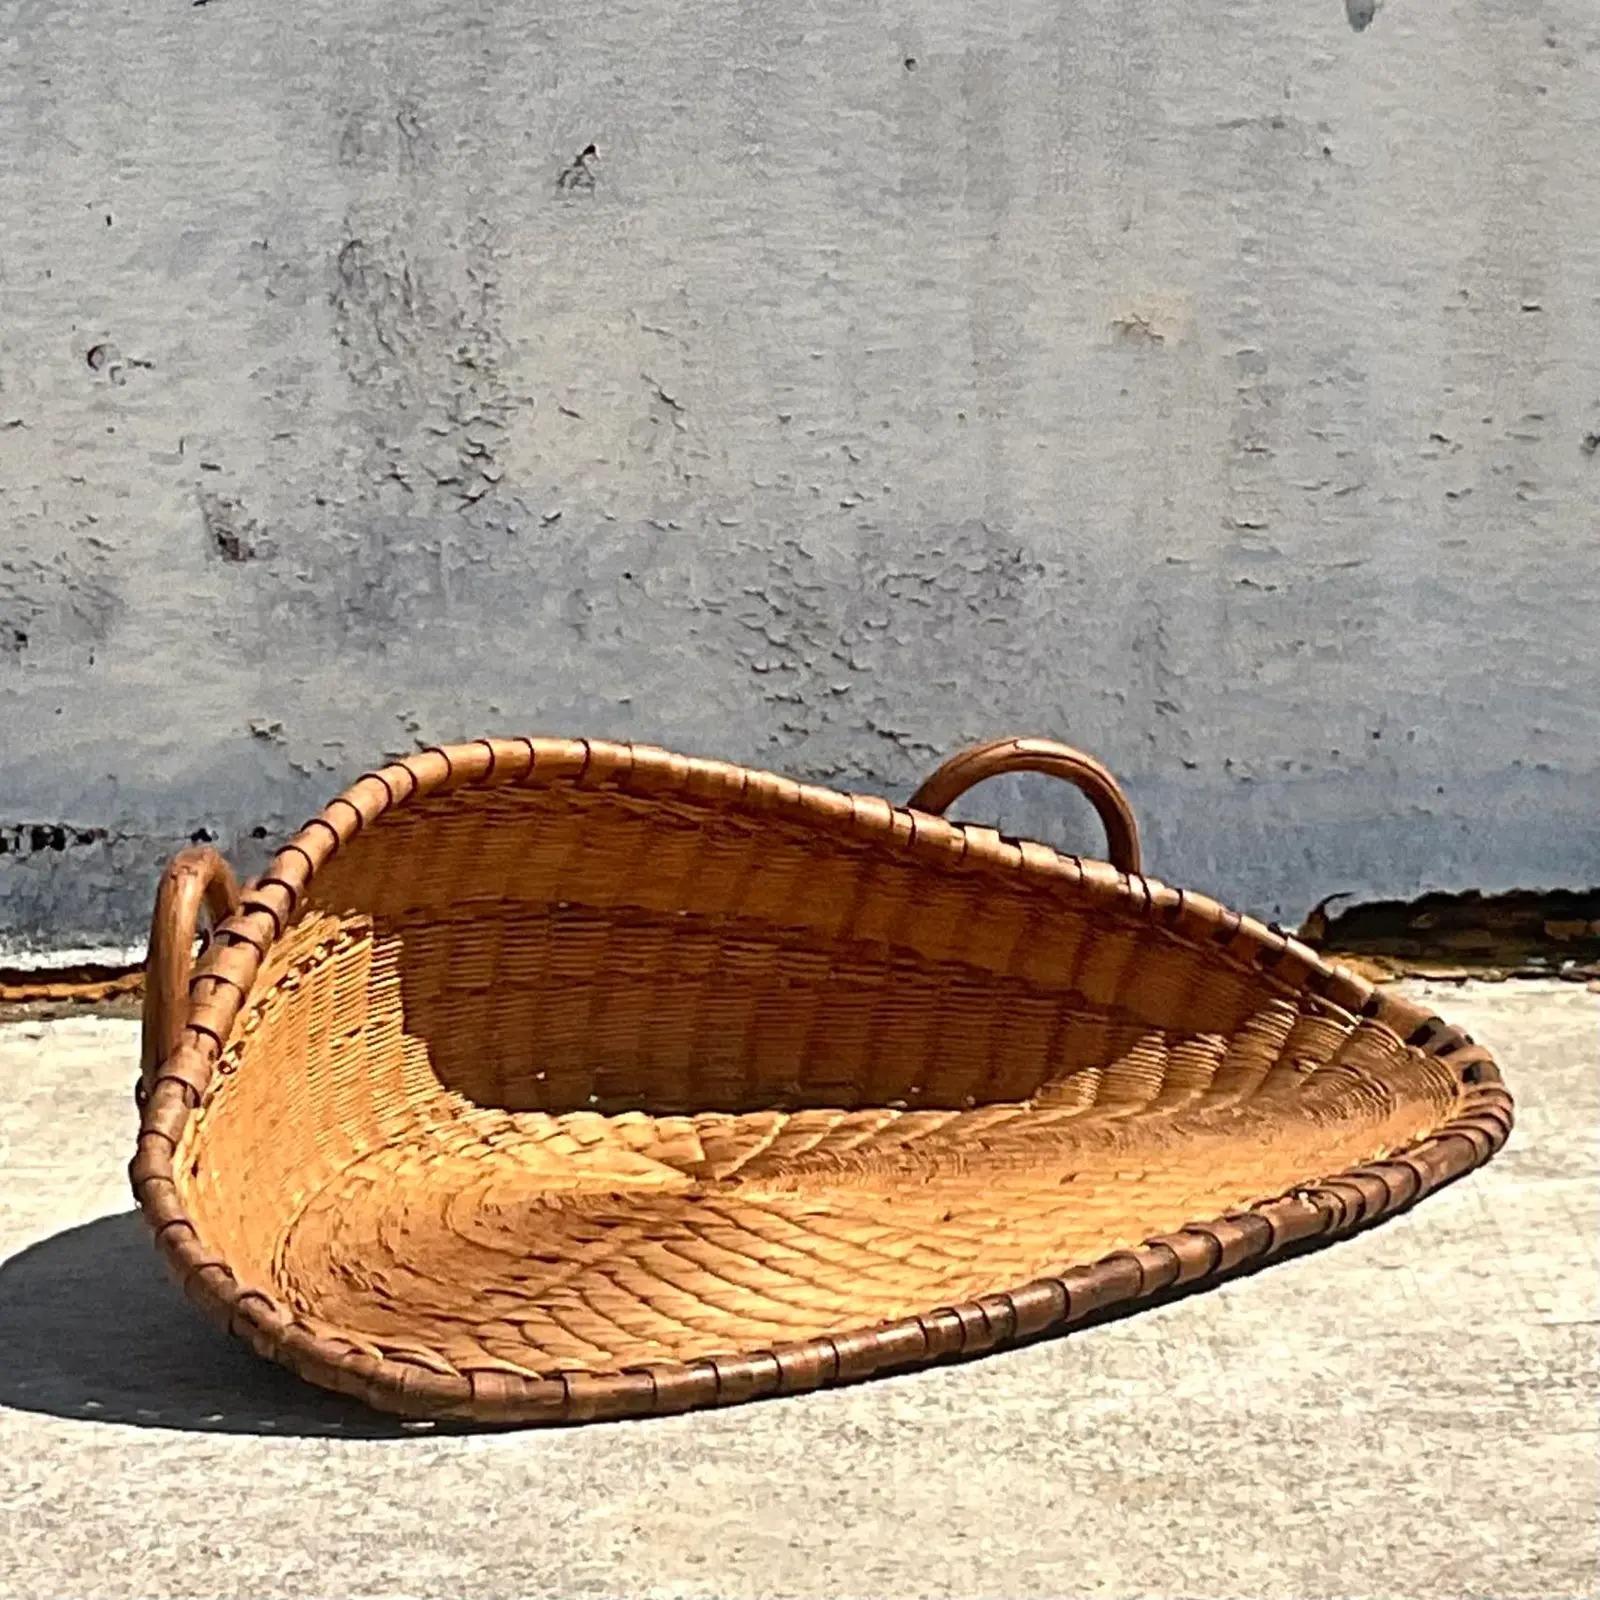 A fabulous vintage coastal basket. A unique shape that has so many possibilities. Beautiful as a wall hanging, a centerpiece or even a super chic dog bed. Brought from New Zealand to the US. Acquired from a Hobe Sound estate.